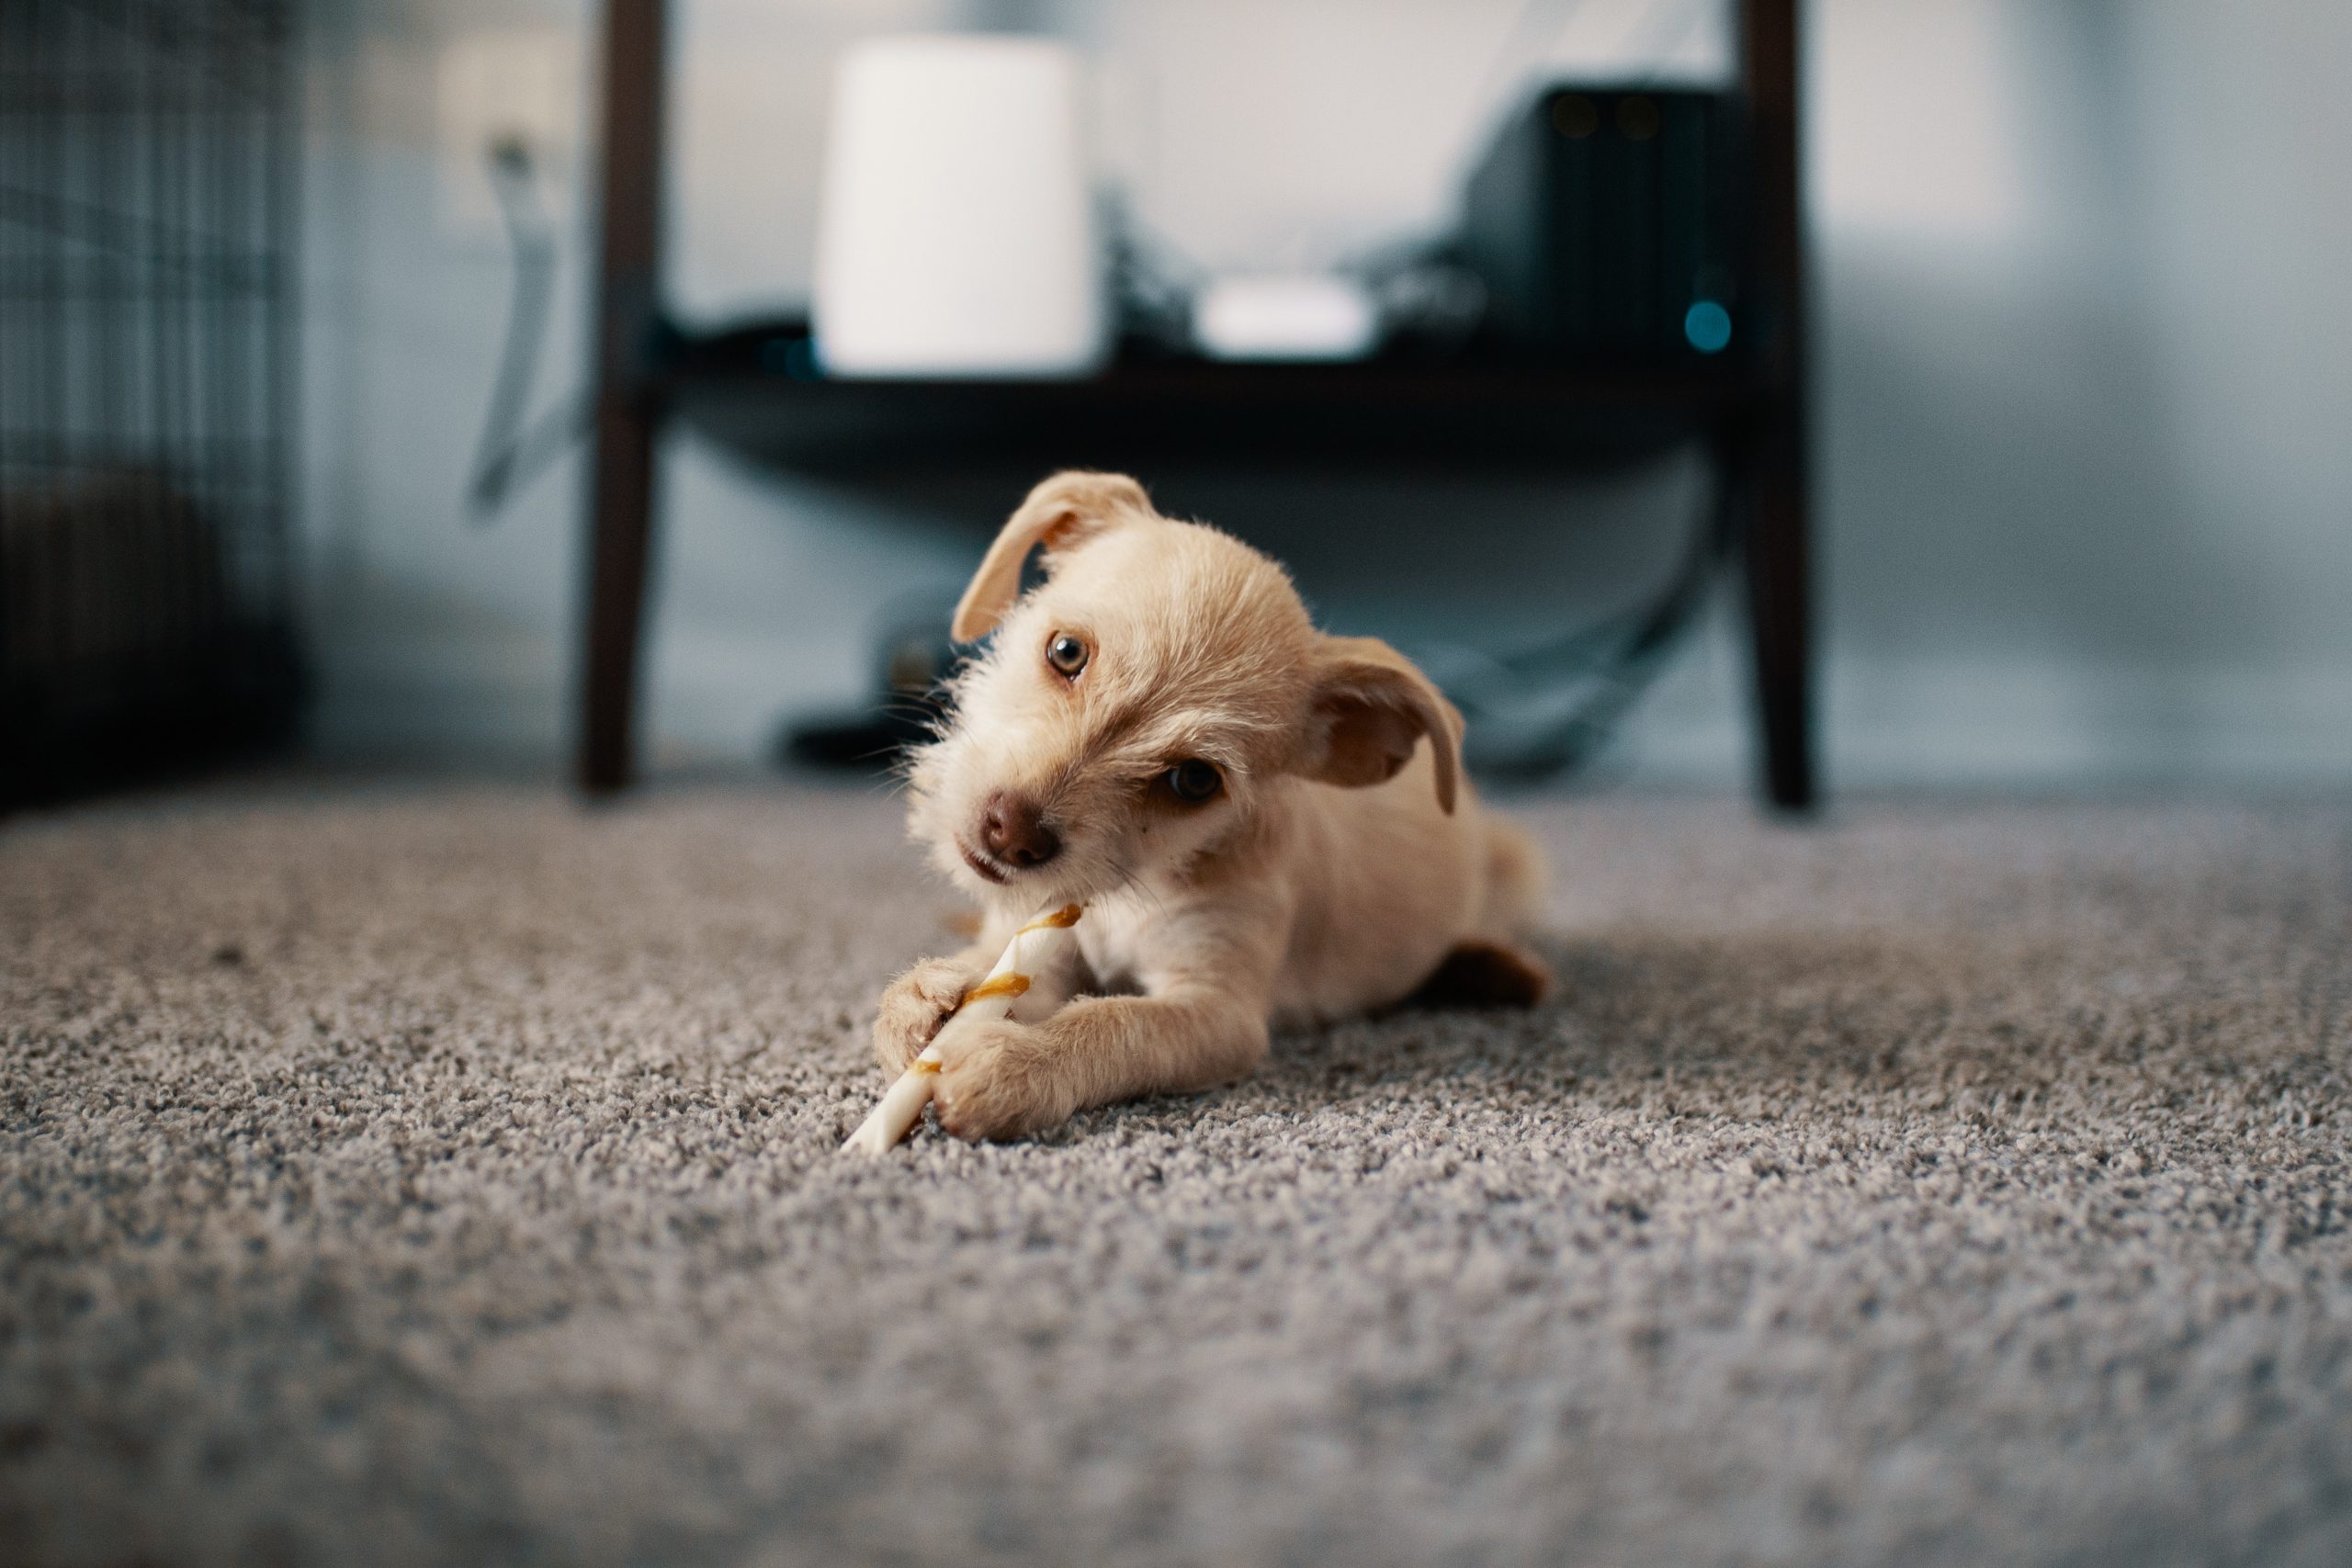 image of puppy on carpet tiles to illustrate carpet tiles for basements